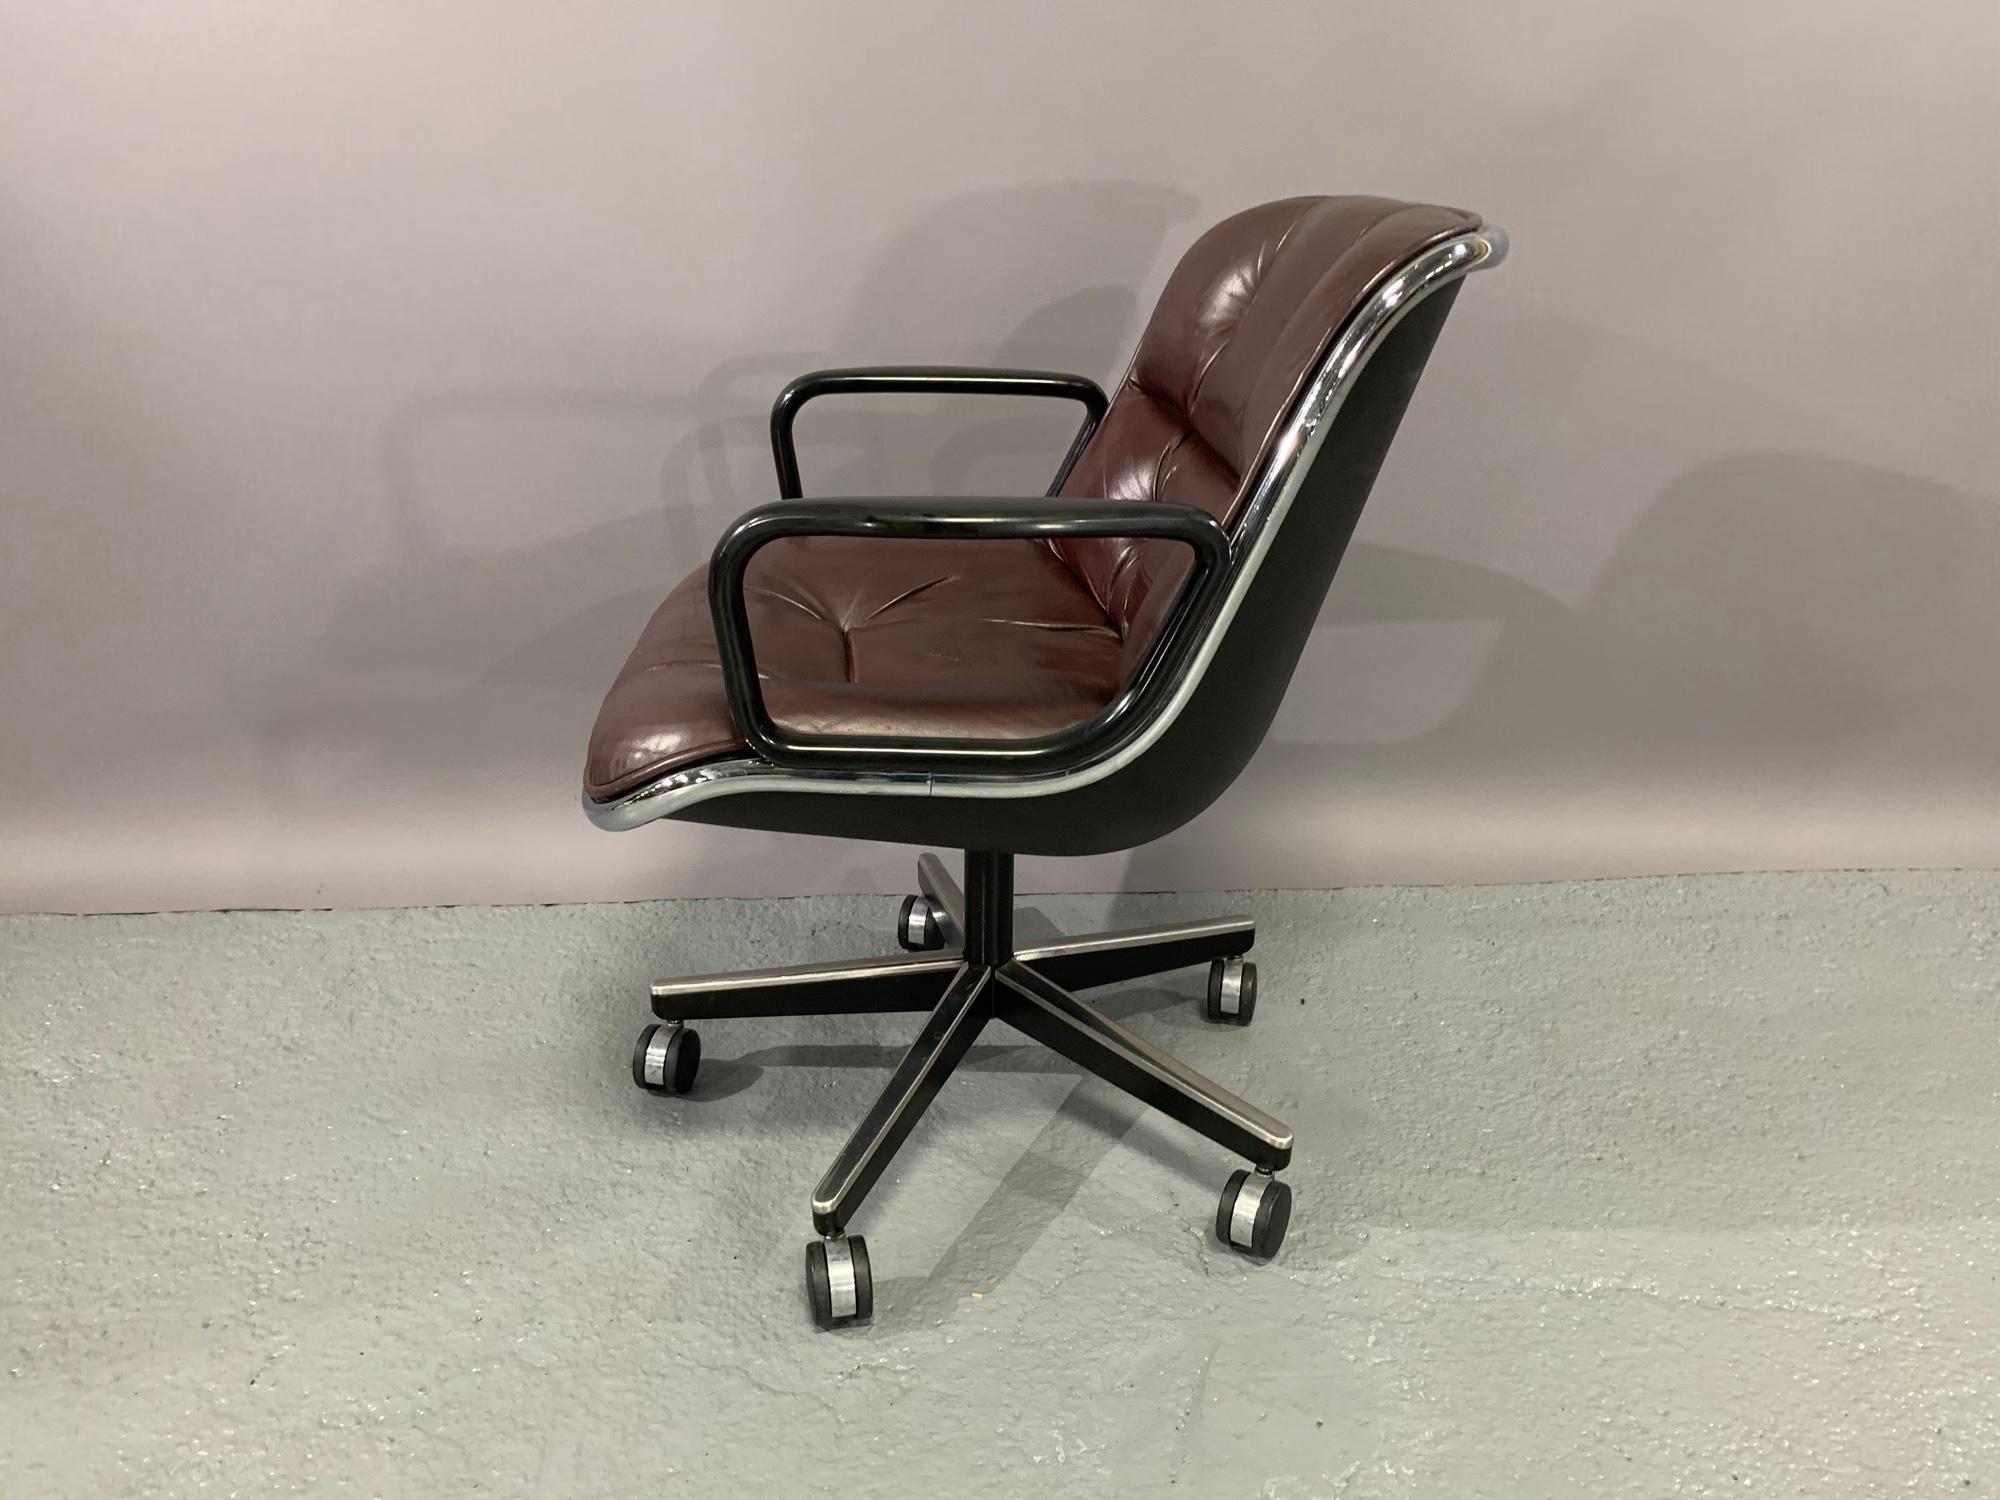 Executive chair designed by Charles Pollock in 1965 for Knoll international in cordovan leather. This comfortable chair, equally suited for the office, board room or the home, is considered one of Knoll’s most memorable designs. It features a chrome